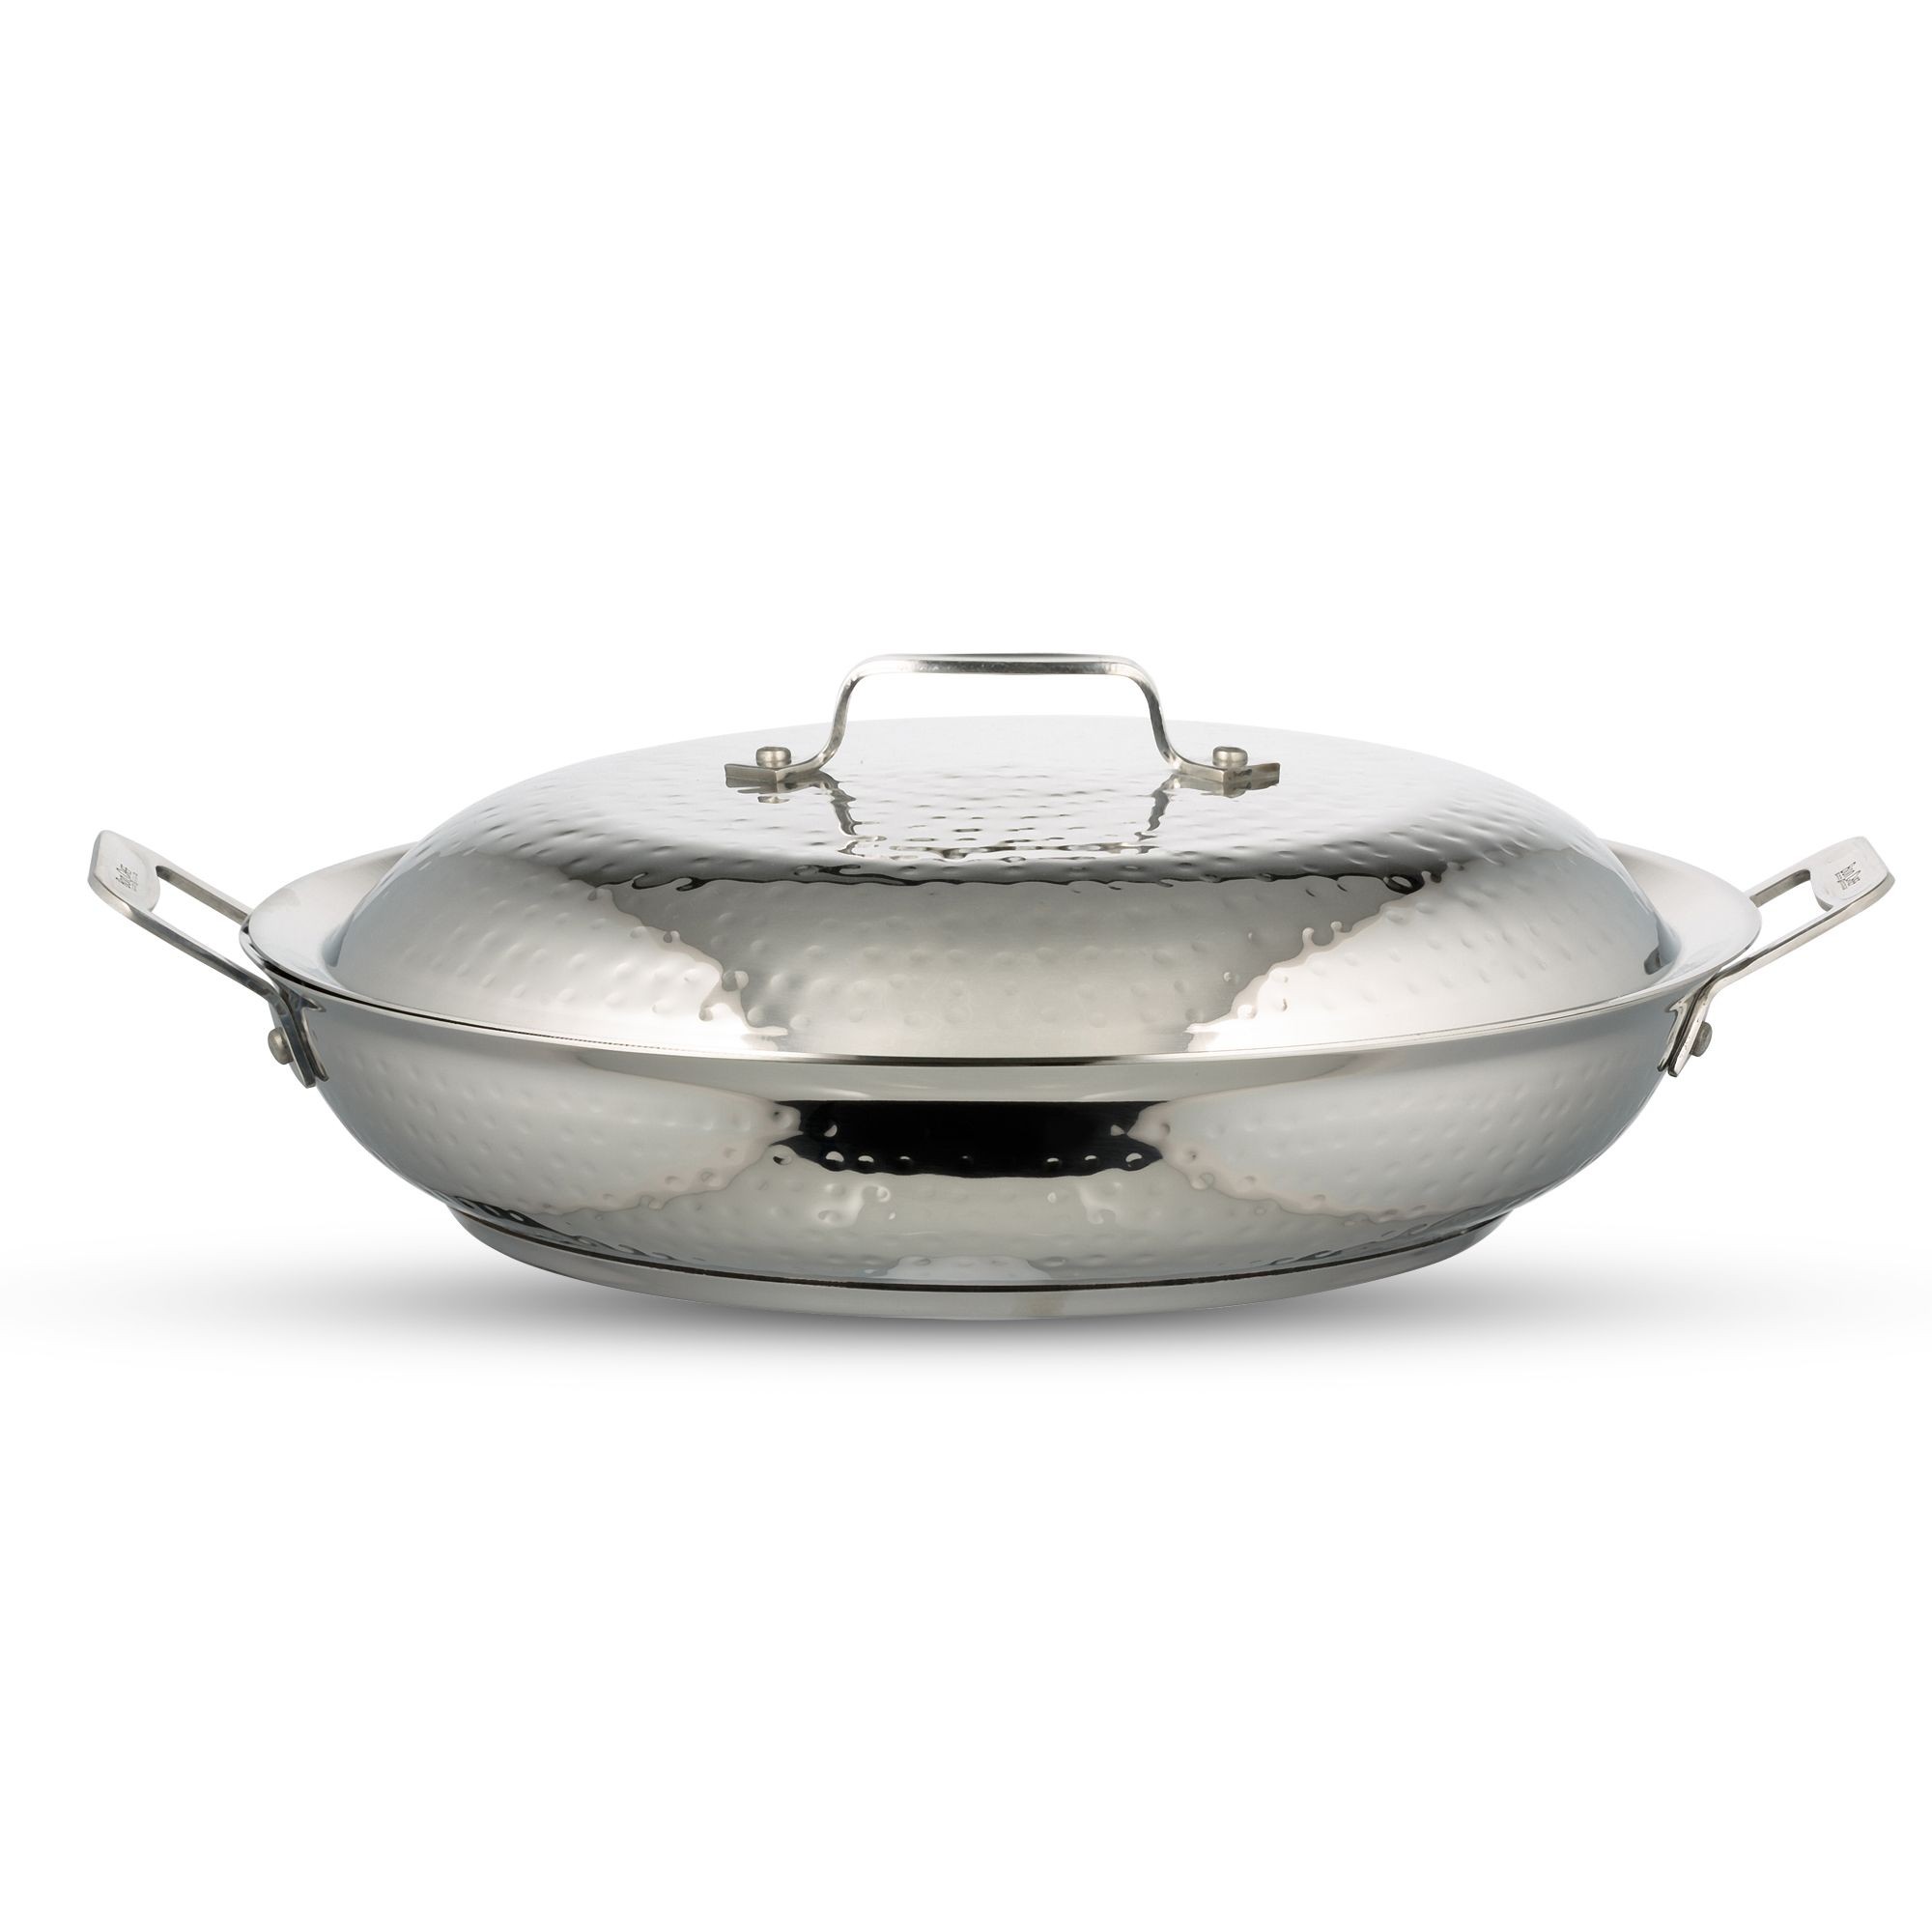 Bon Chef 60006HF Cucina Stainless Steel Braiser Pan with Lid, Hammered Finish, 3 1/2 Qt.